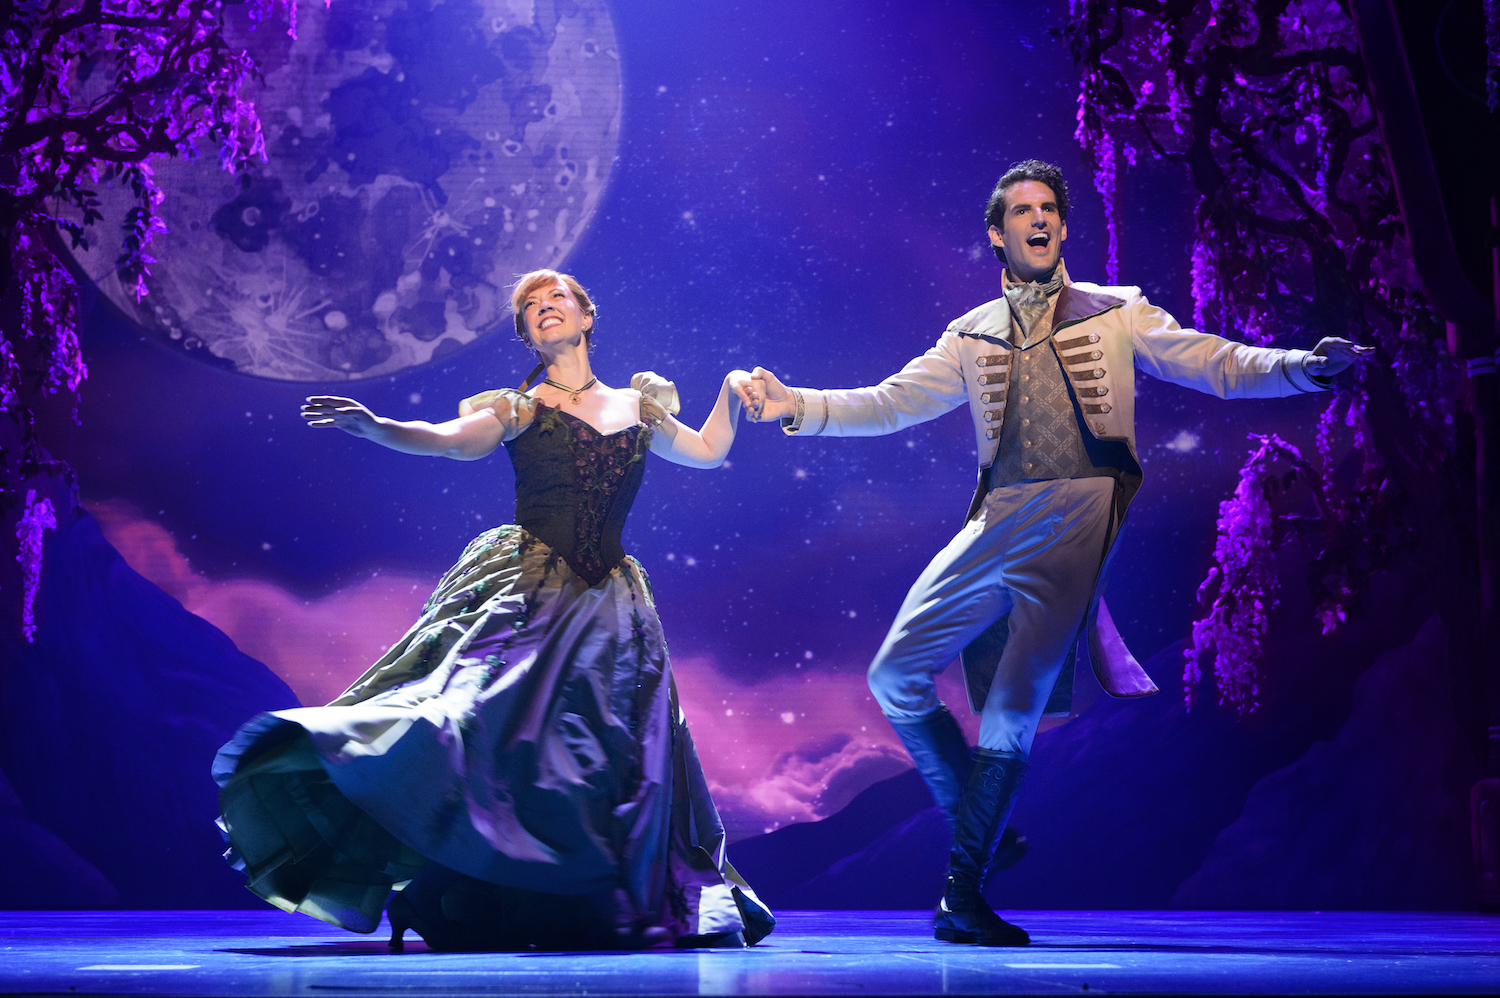 Here’s everything you should know about getting tickets to Frozen on